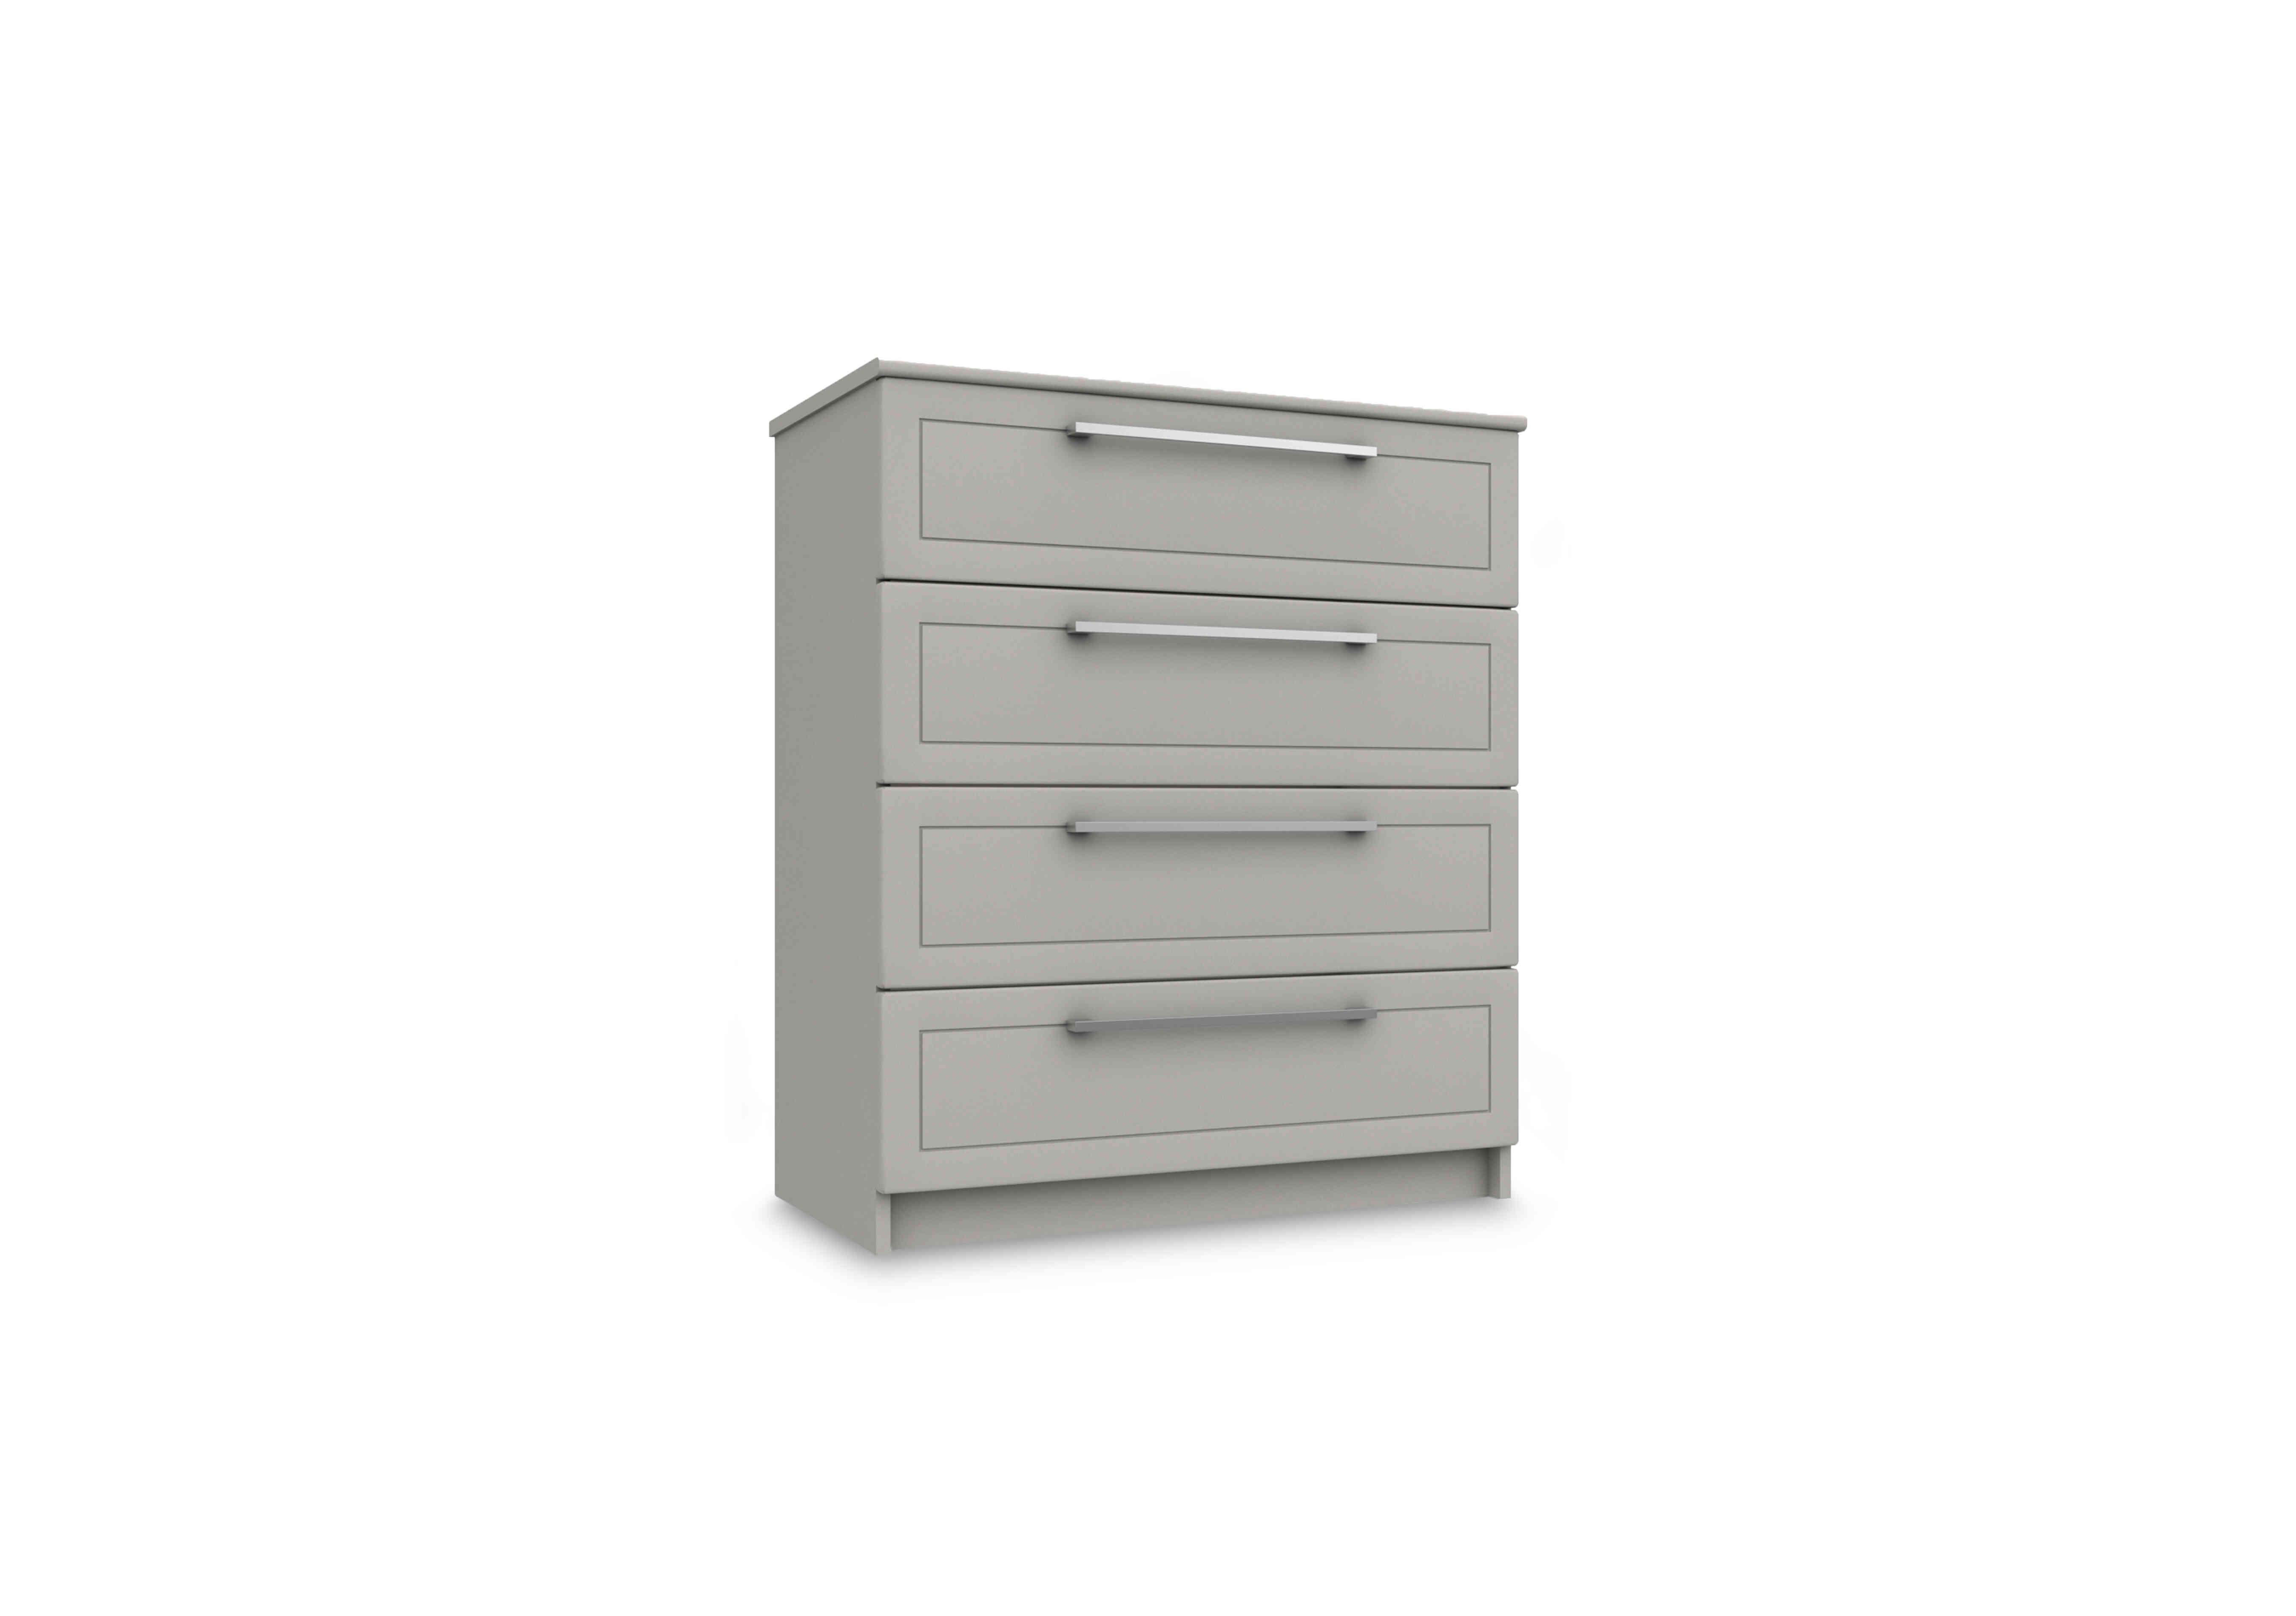 Bexley 4 Drawer Chest in Light Grey Gloss on Furniture Village